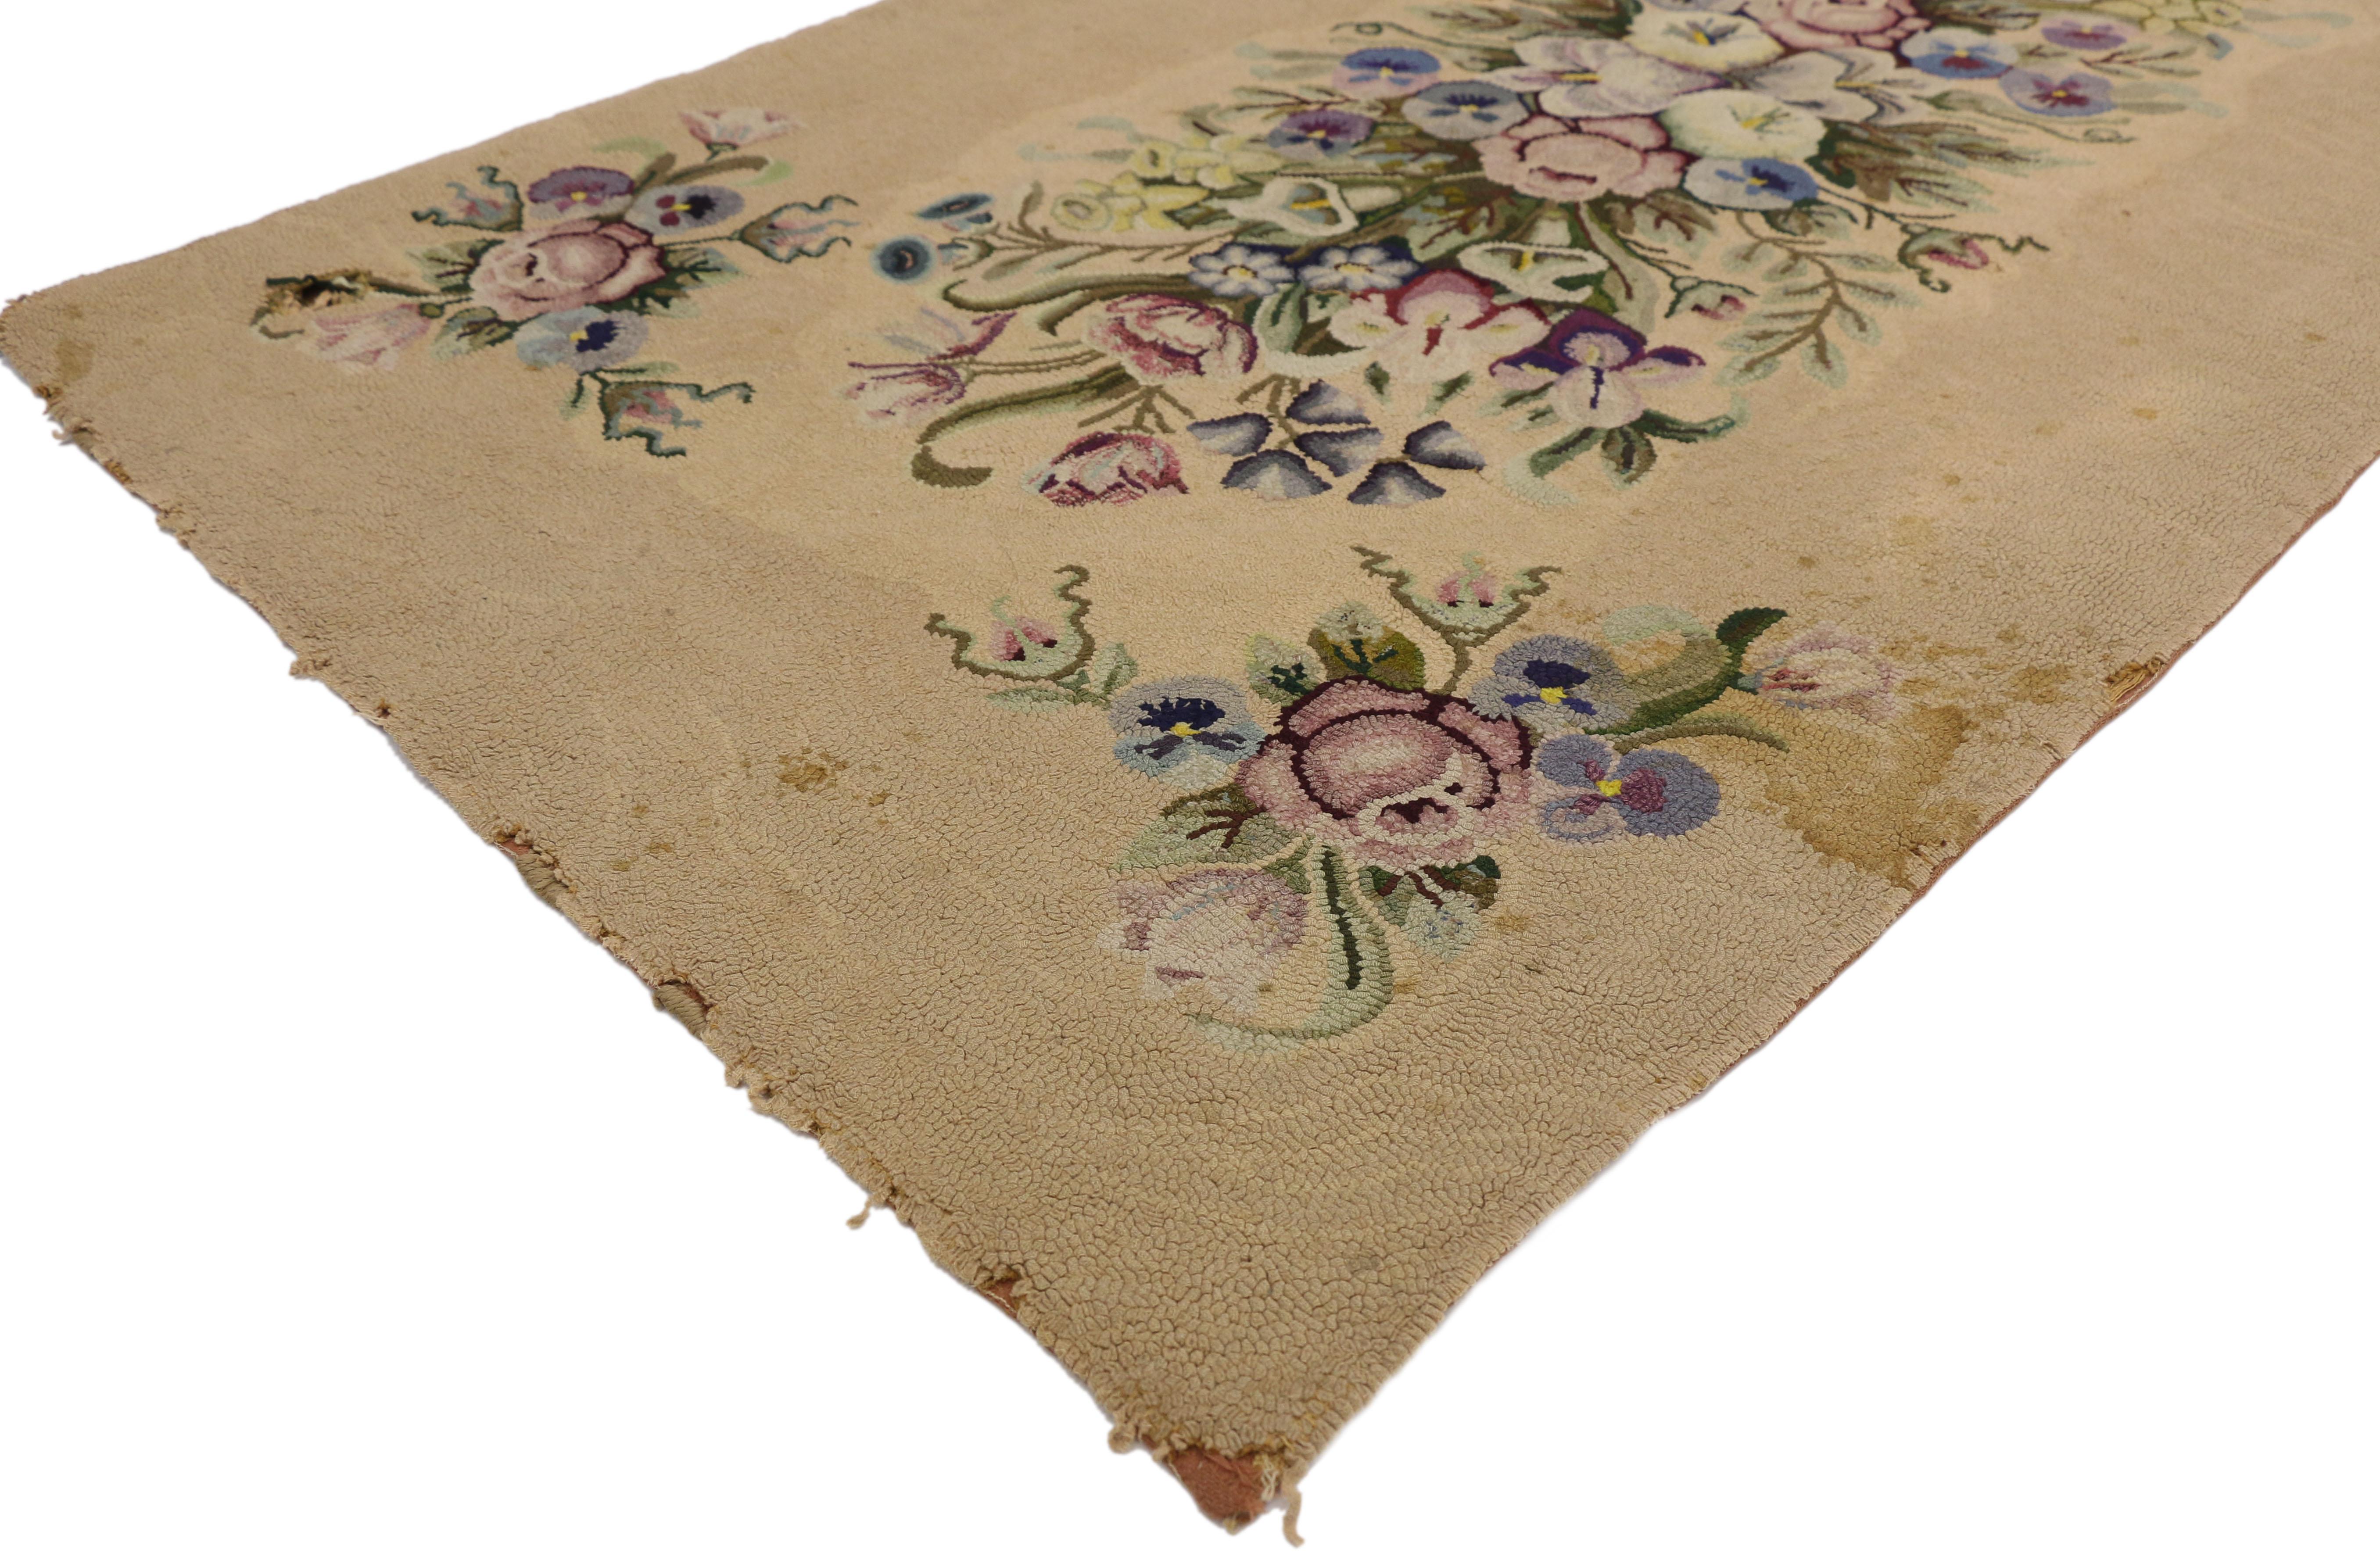 74344 Antique American Hooked rug with French Aubusson style. This antique American hand hooked rug with French Aubusson style features a decorative winter and spring floral bouquet composed of white Anthurium, pansies, daffodils, English primrose,